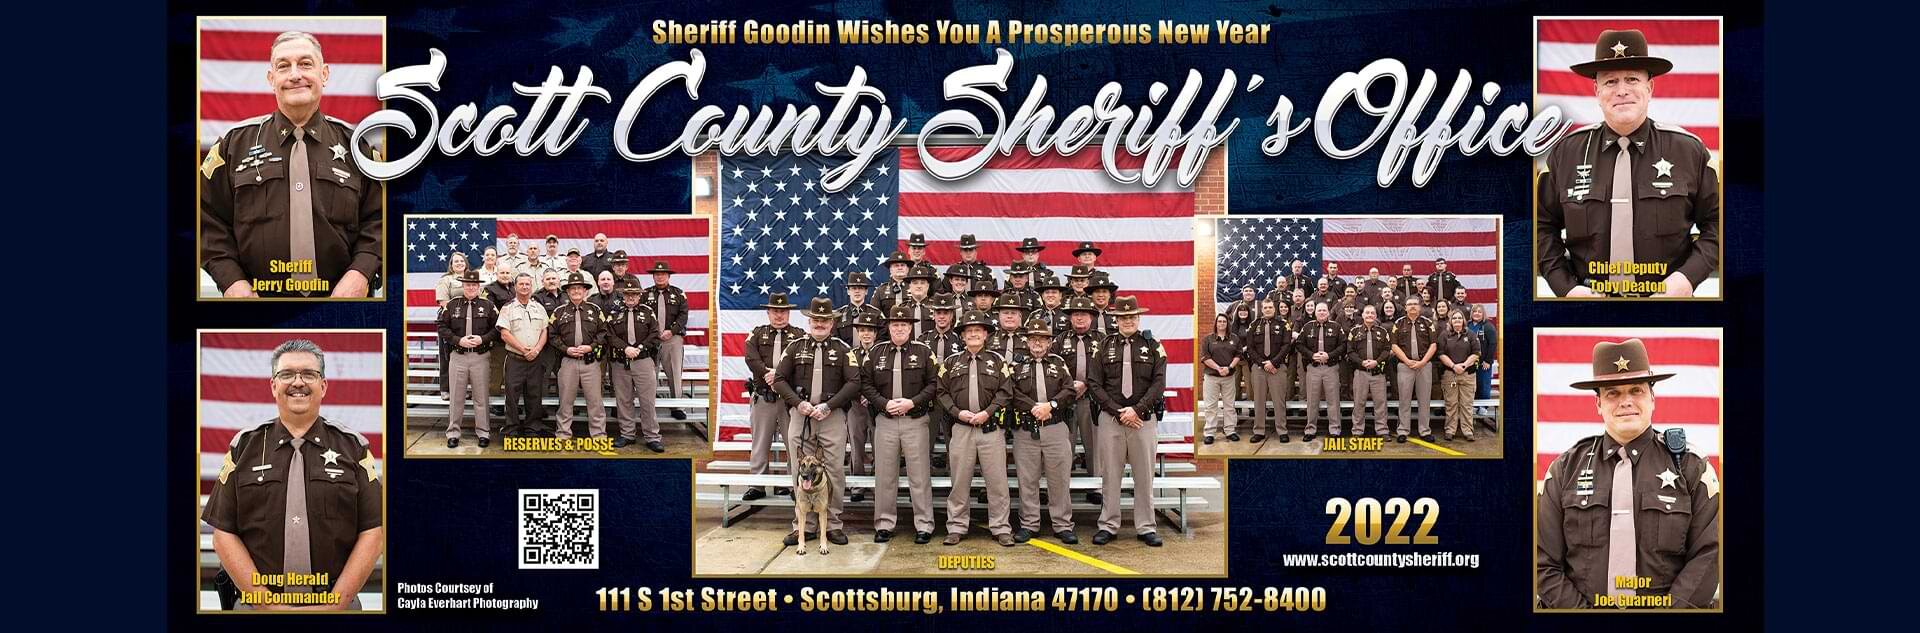 Scott County Sheriff's Office collage of the staff.